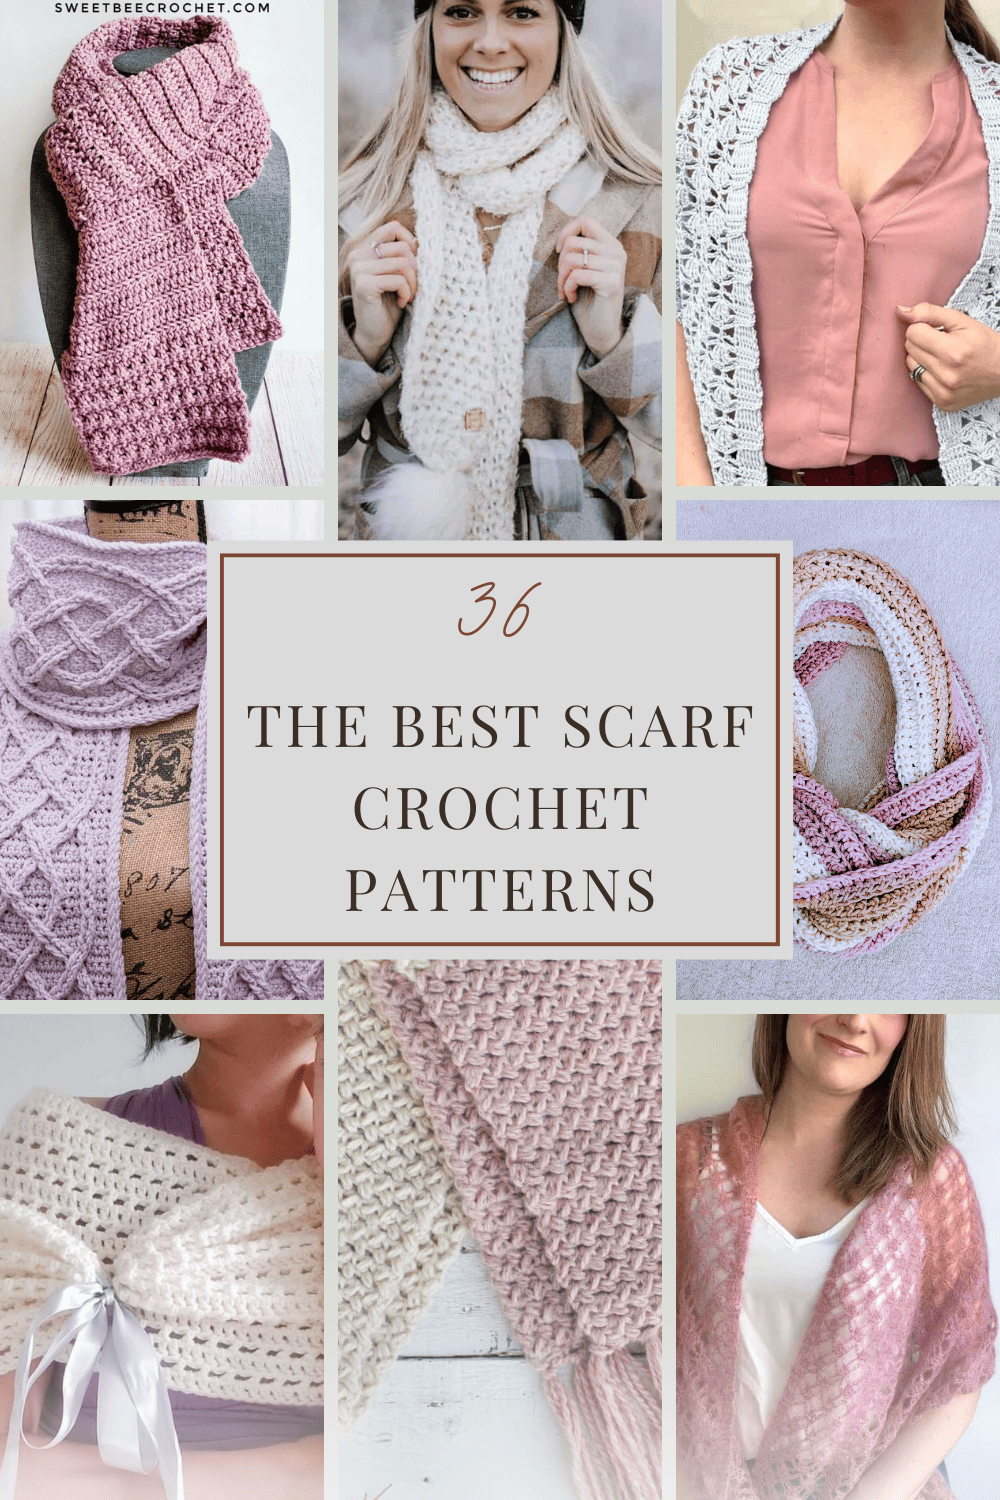 The Best 36 Crochet Scarf Patterns for Every Season